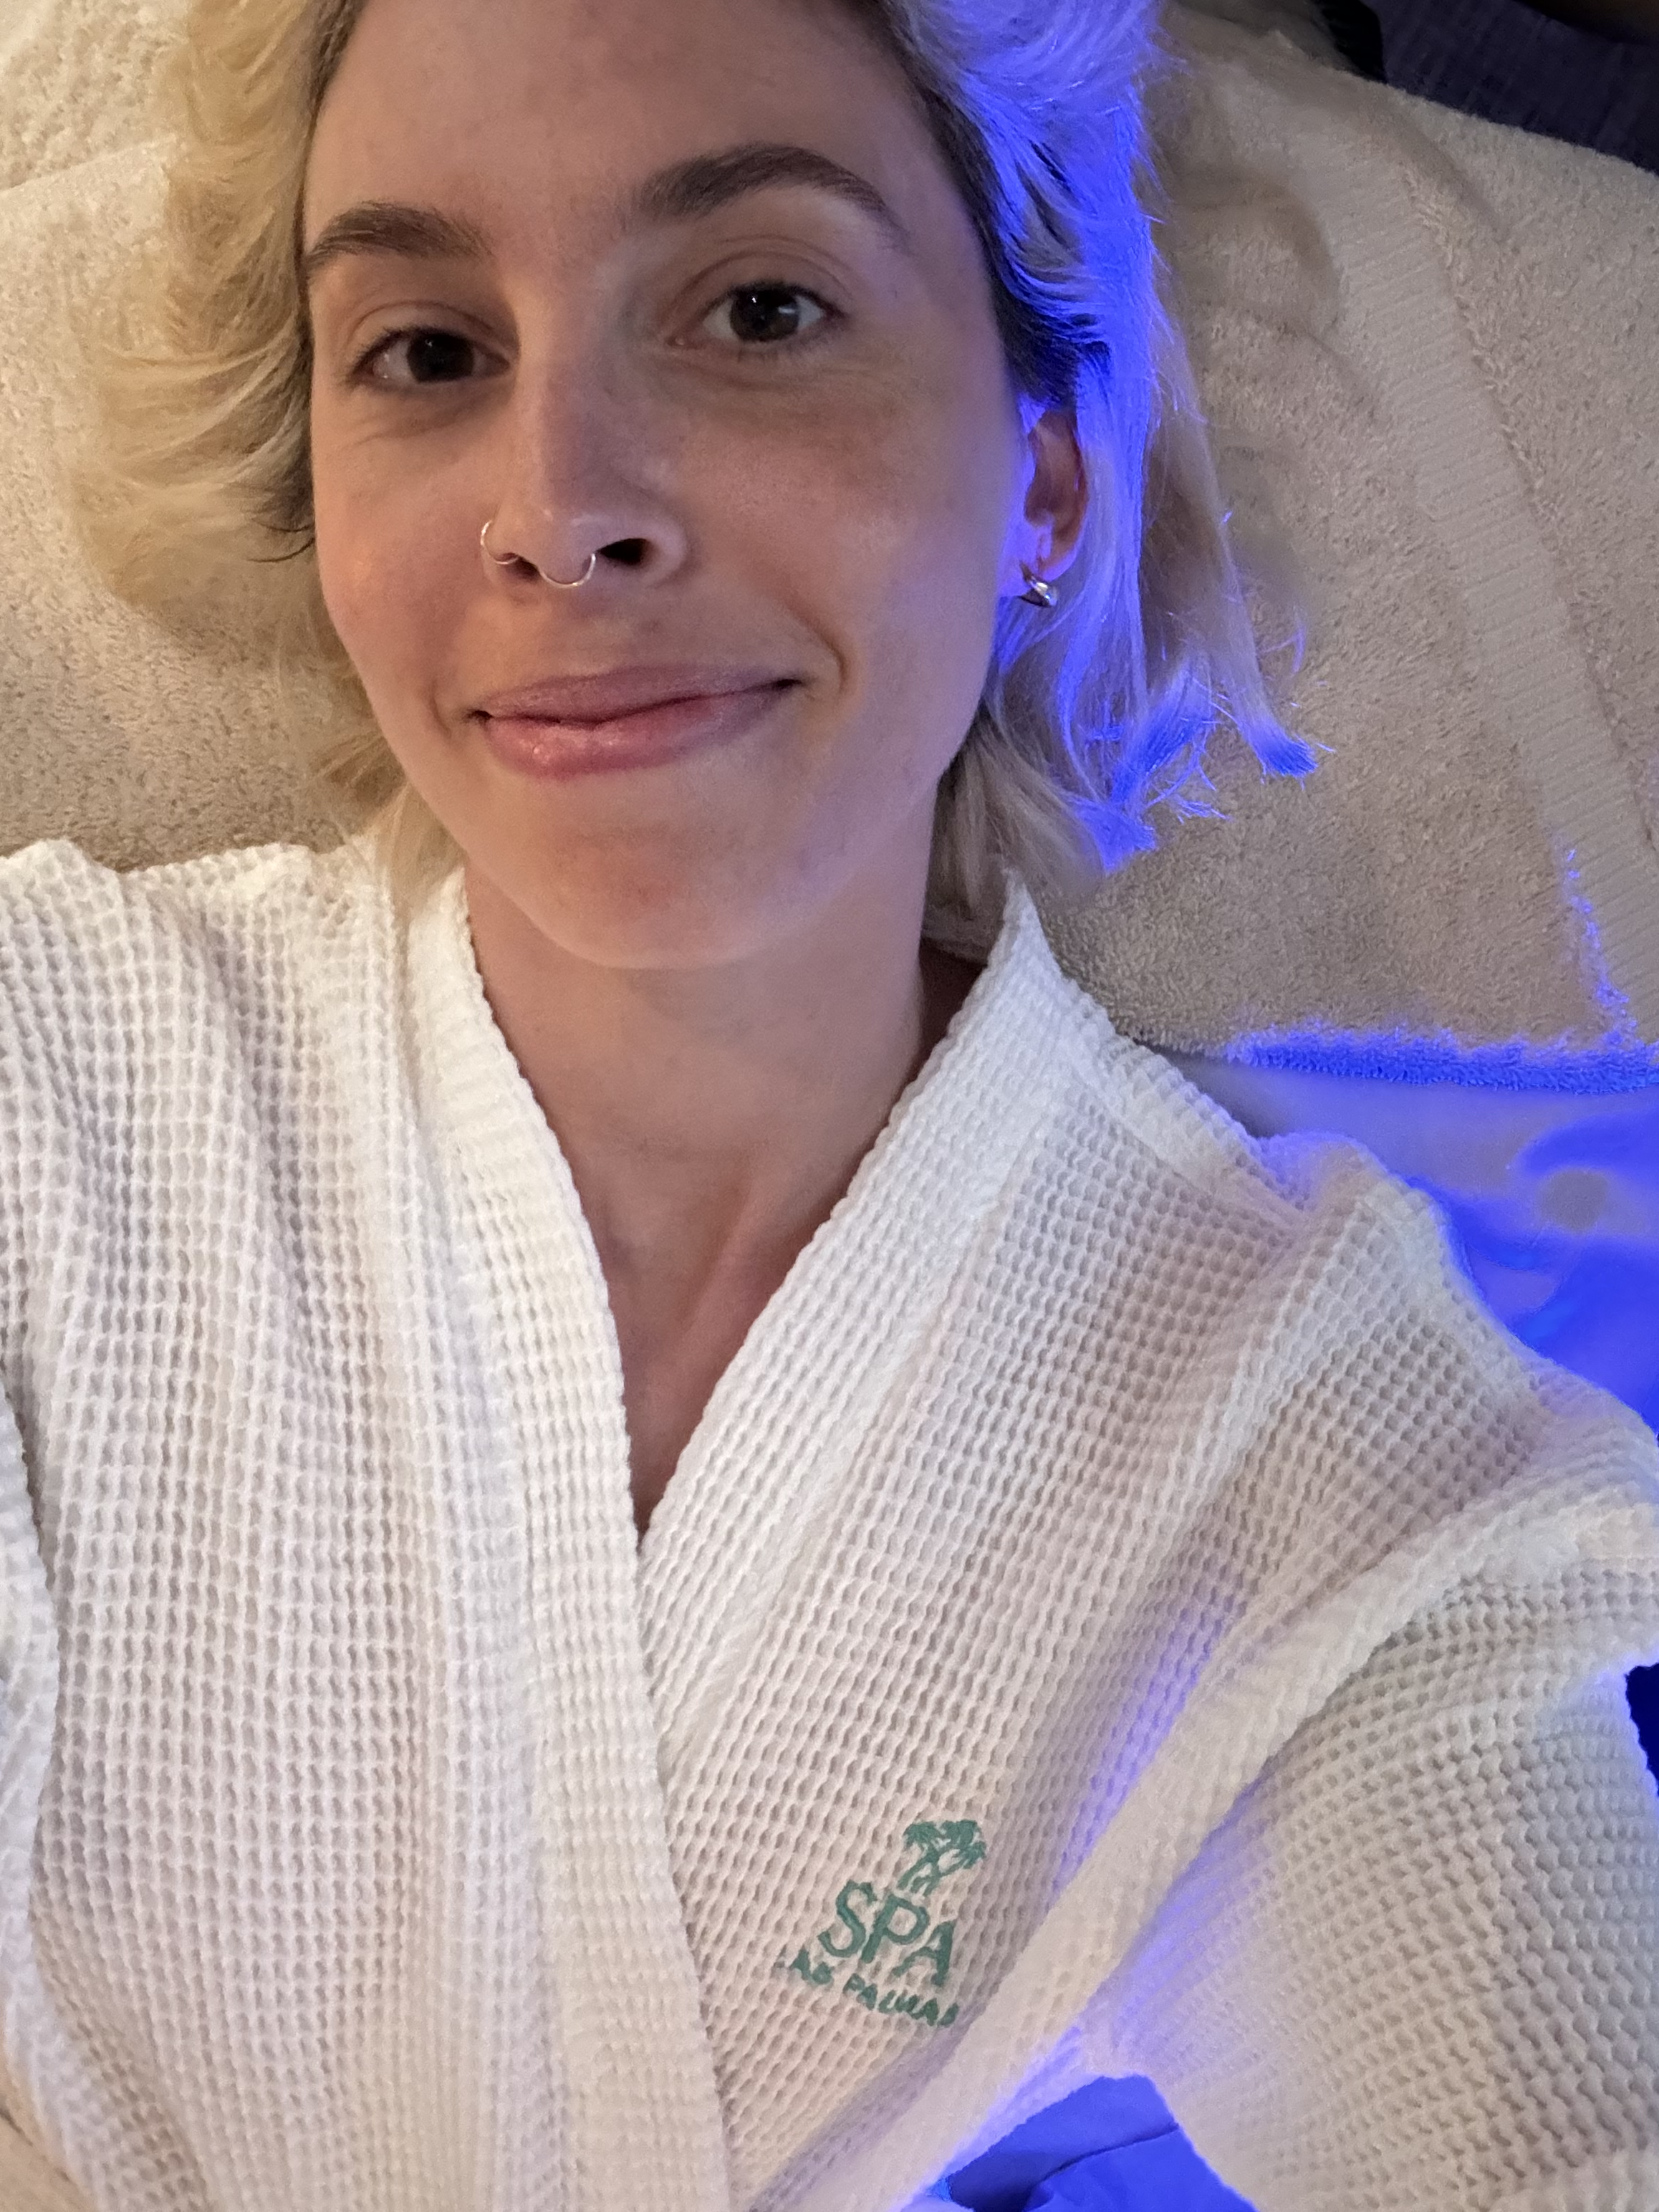 Woman in a spa robe smiling at the camera, likely enjoying a relaxing experience at a travel destination spa